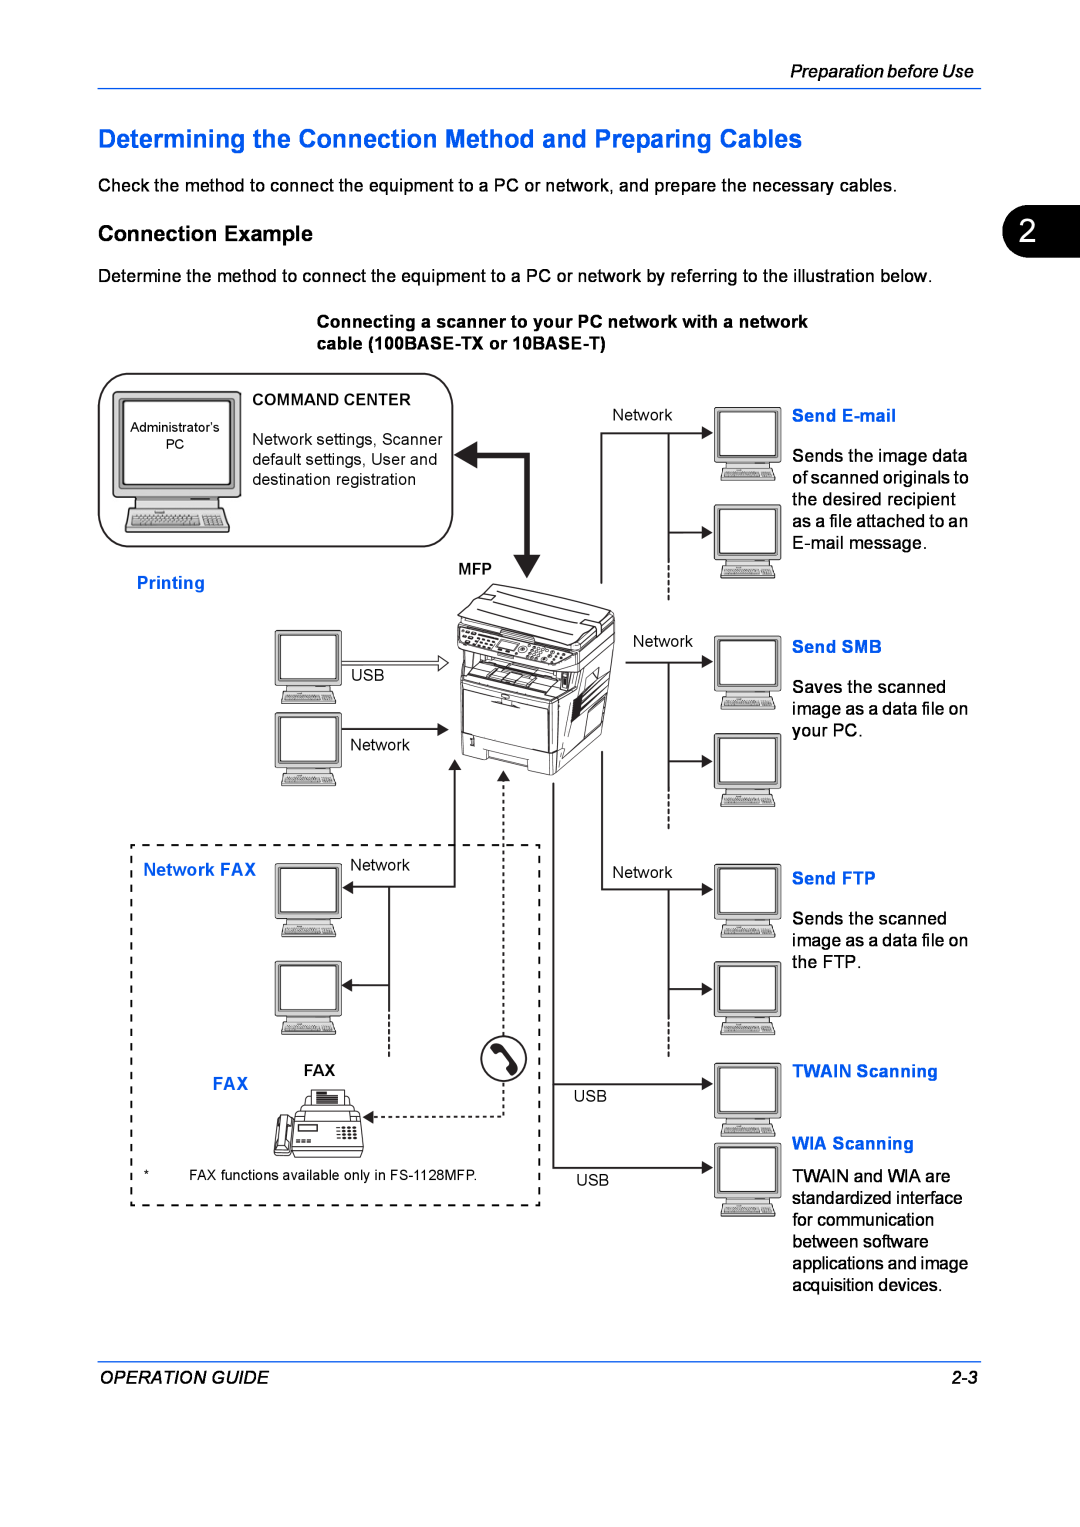 Kyocera FS-1128MFP Determining the Connection Method and Preparing Cables, Connection Example, Preparation before Use 